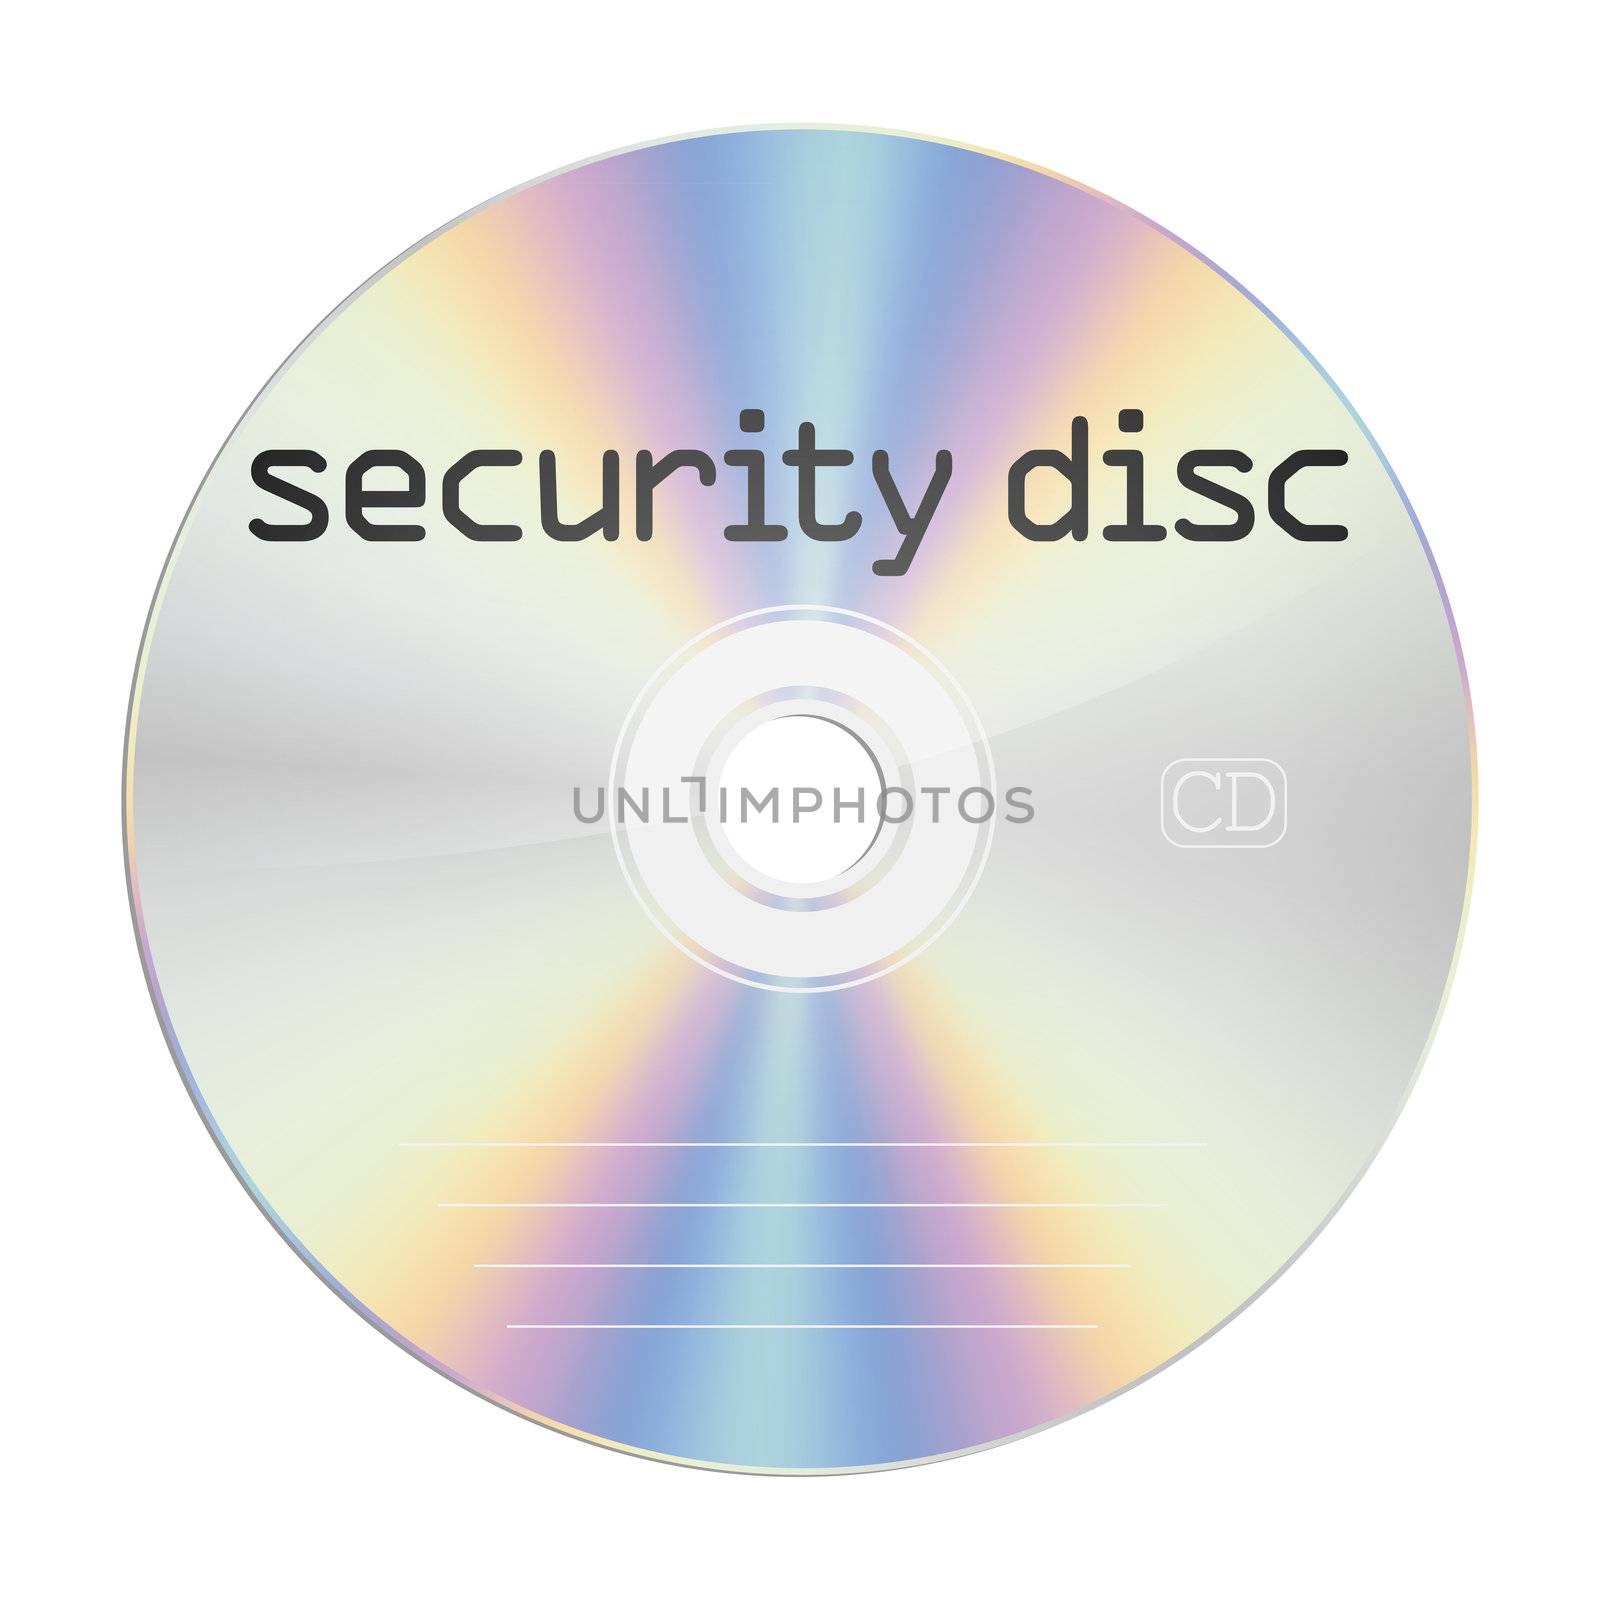 An image of a security compact disc